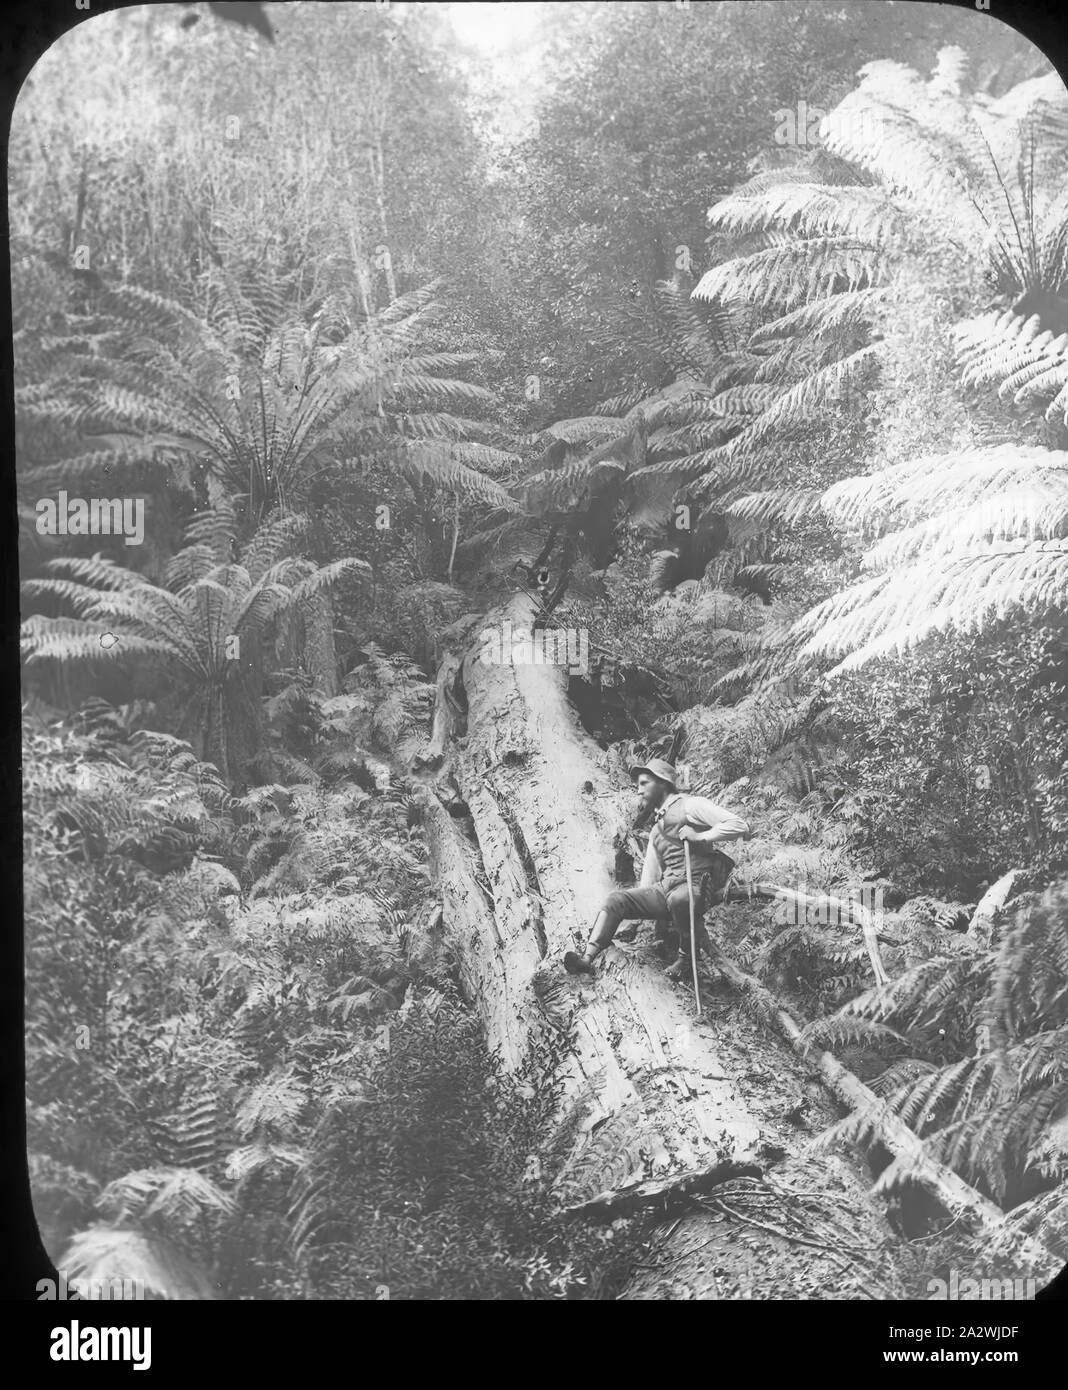 Lantern Slide - Sassafras Creek, Victoria, Date Unknown, Black and white image of a gentleman sitting on the trunk of a fallen tree providing some indication of the tree's immense size Stock Photo